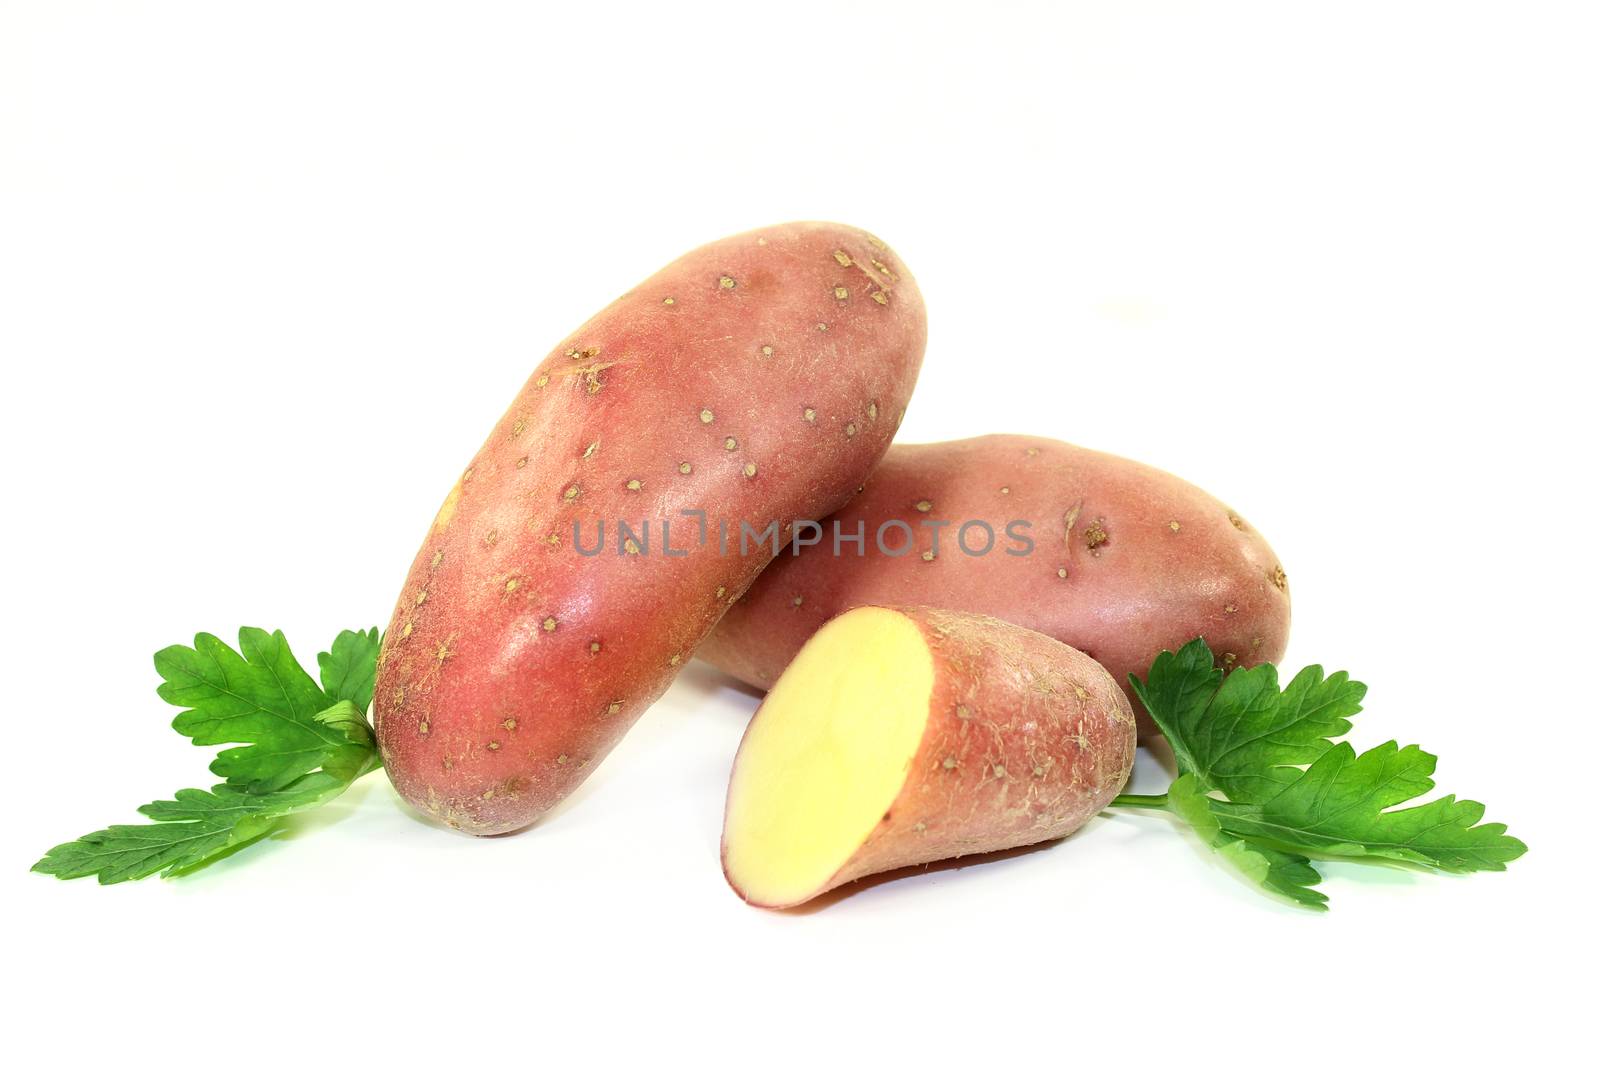 raw, red potatoes on a white background